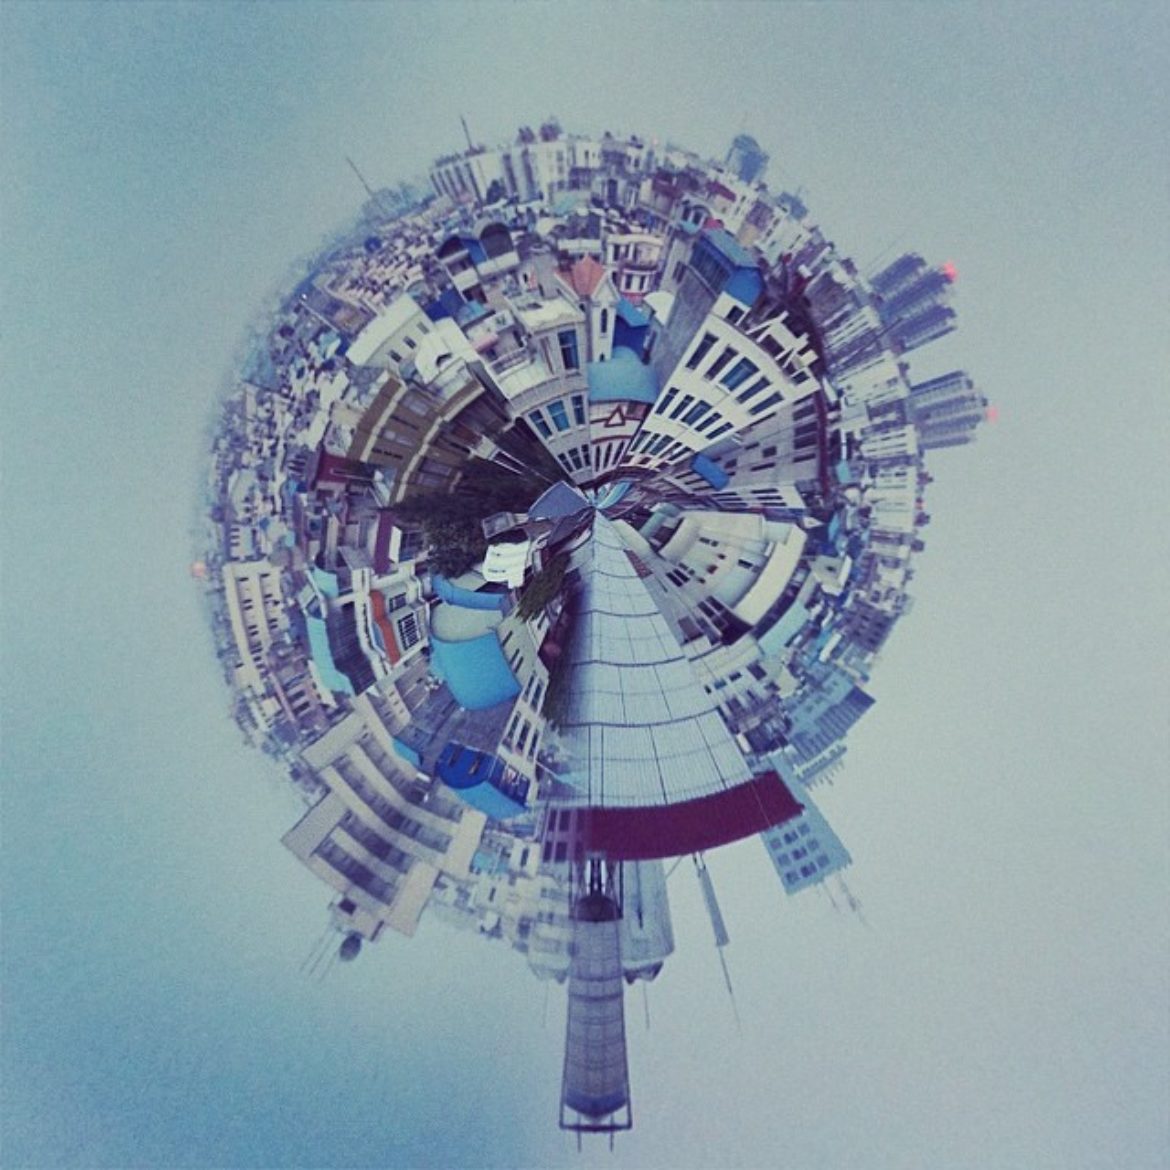 This is a tiny planet